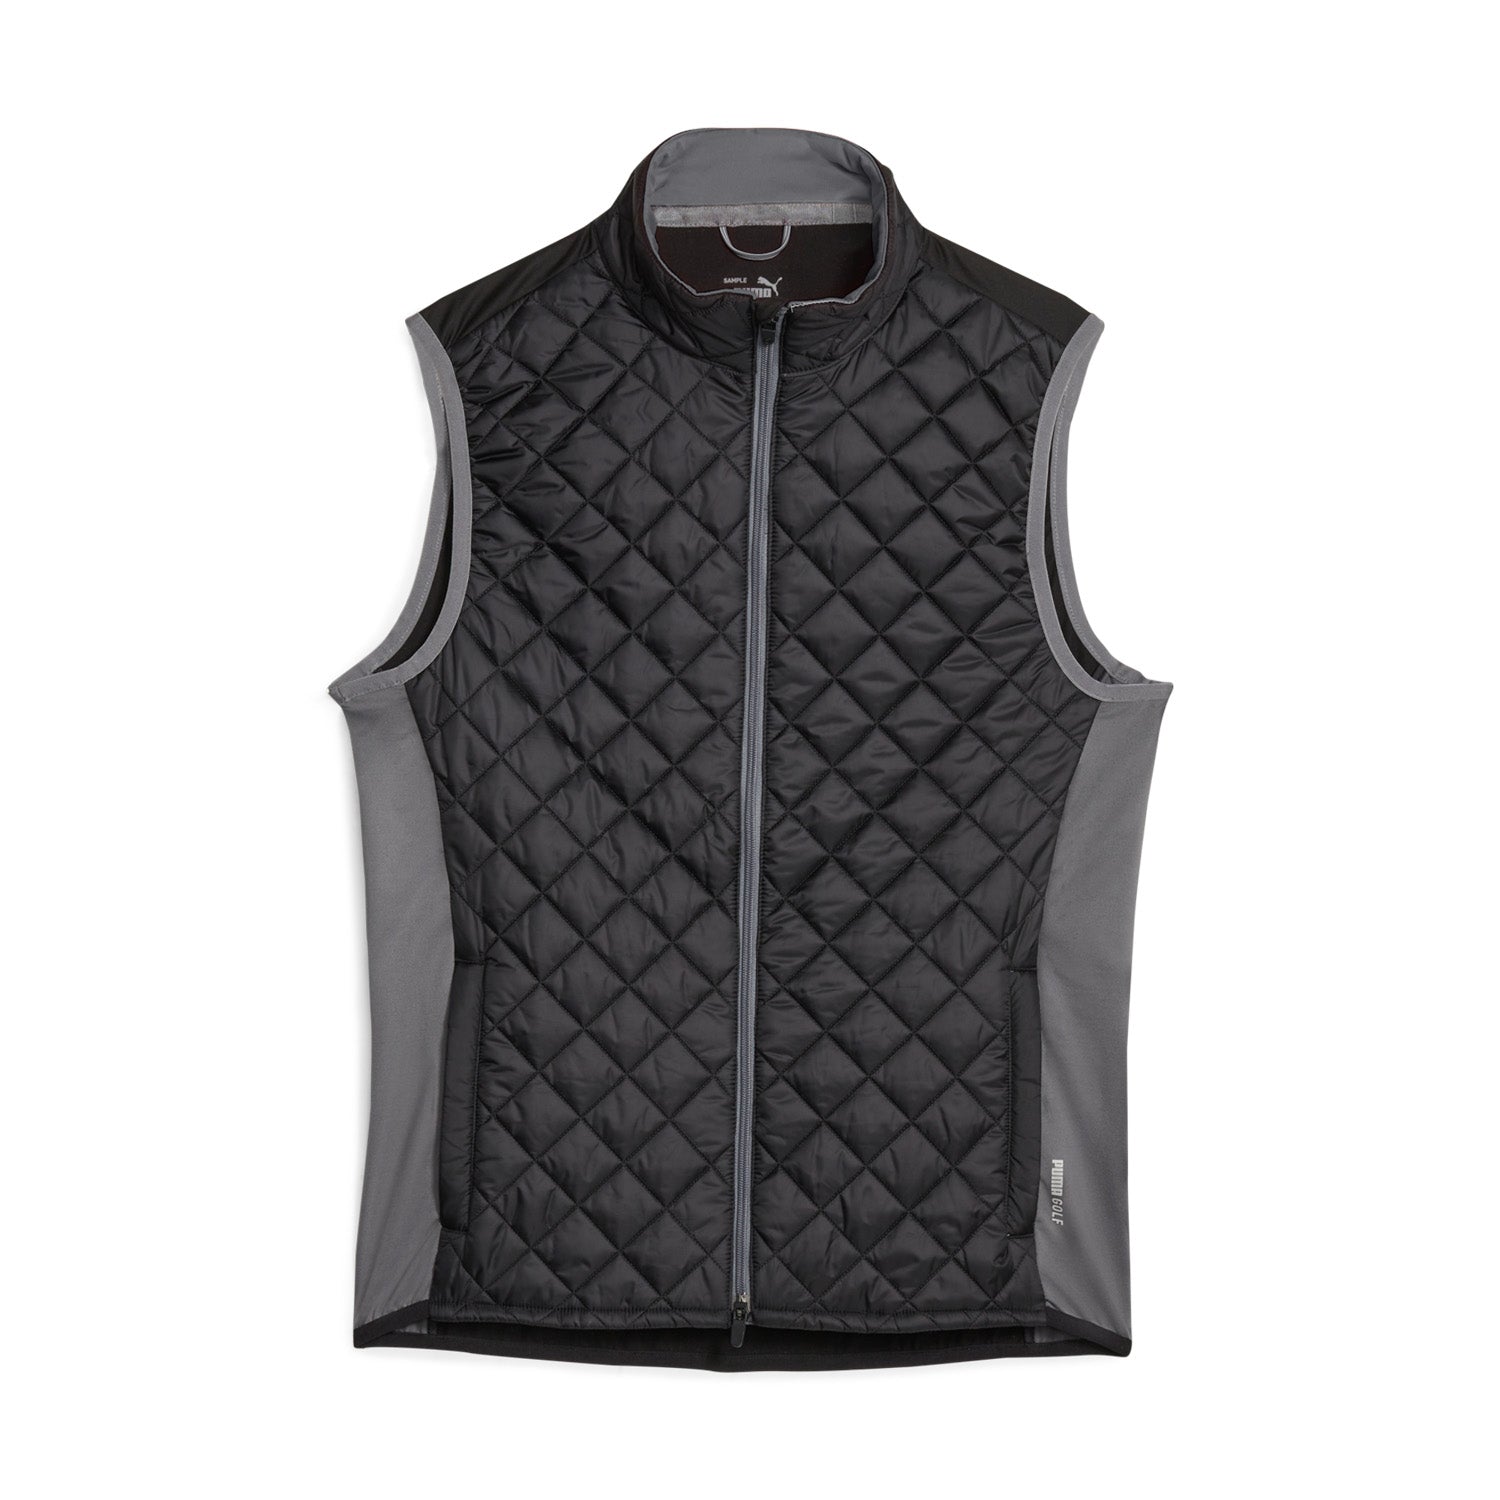 Puma FROST QUILTED VEST Puma Black, Slate Sky